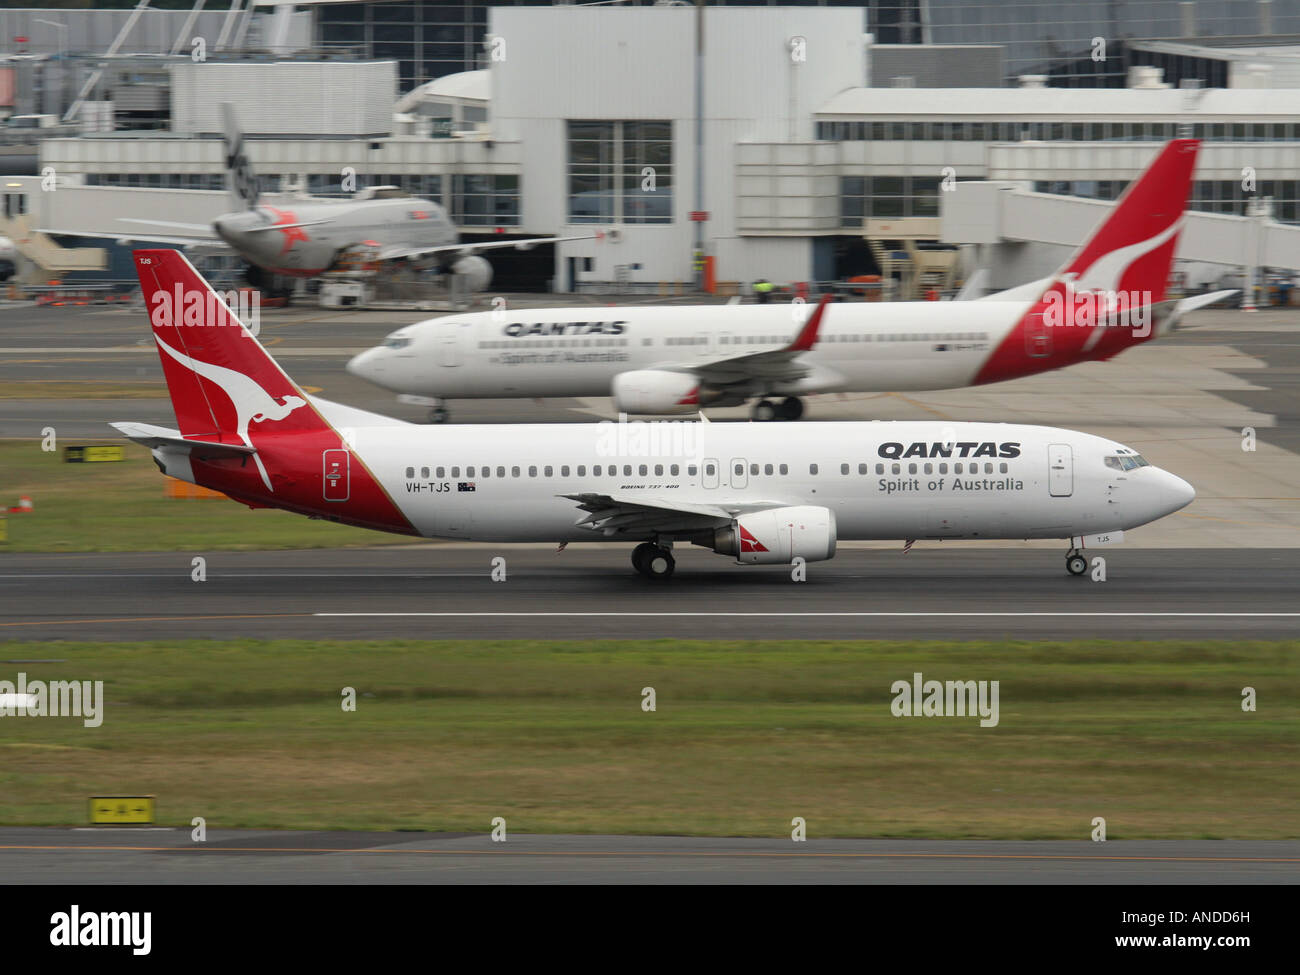 A Qantas Boeing 737-400 passes by a later 737-800 as it accelerates down the runway for takeoff from Sydney Airport. Air traffic at a busy airport. Stock Photo